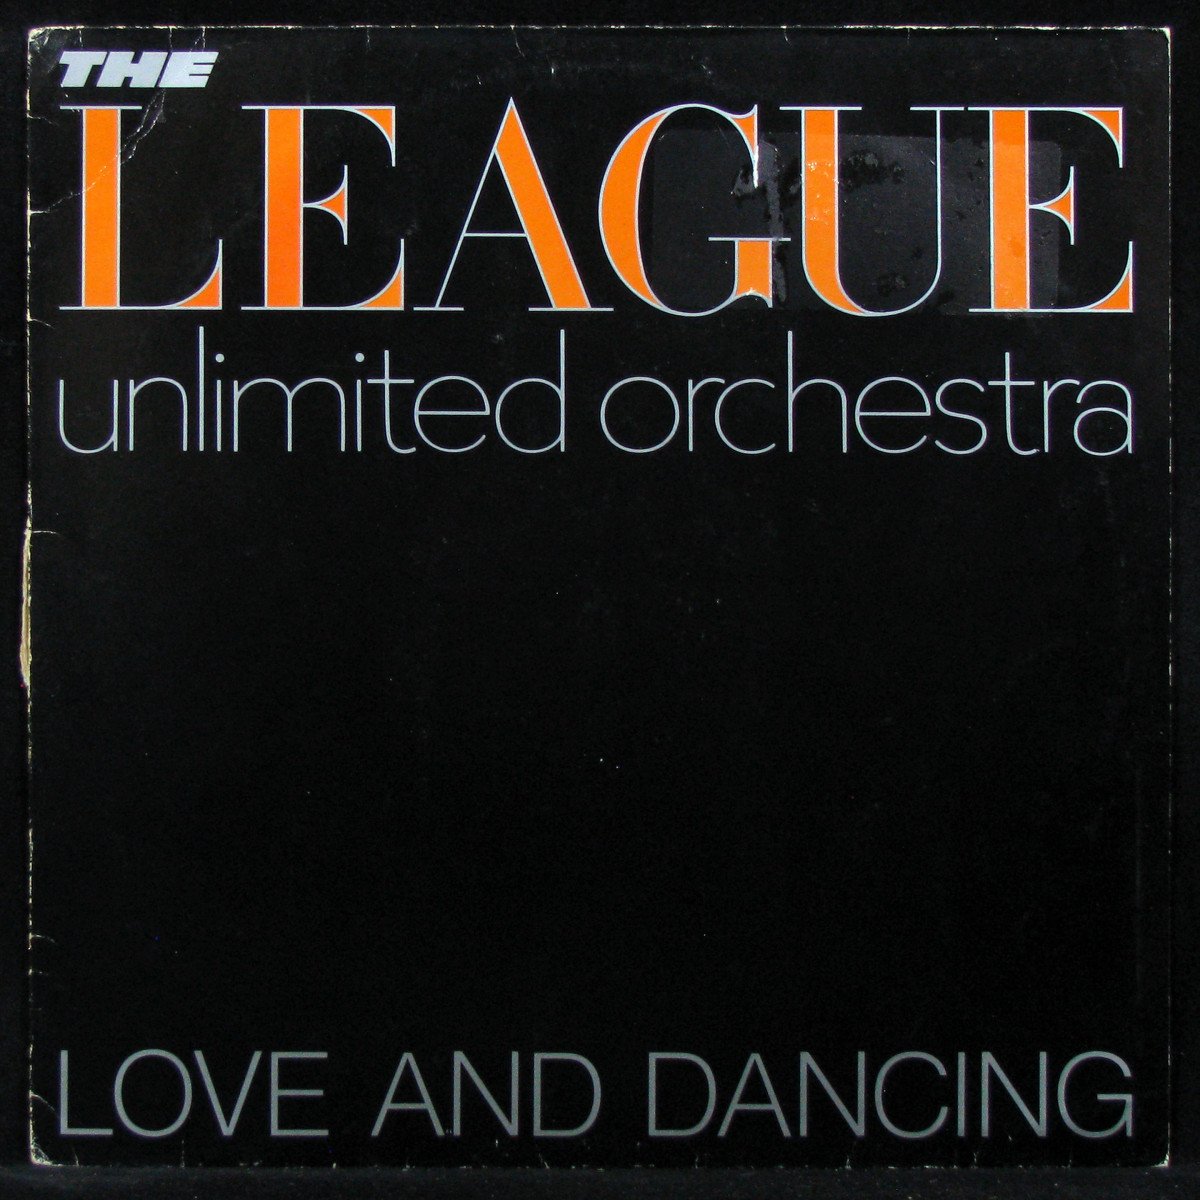 LP League Unlimited Orchestra — Love And Dancing фото